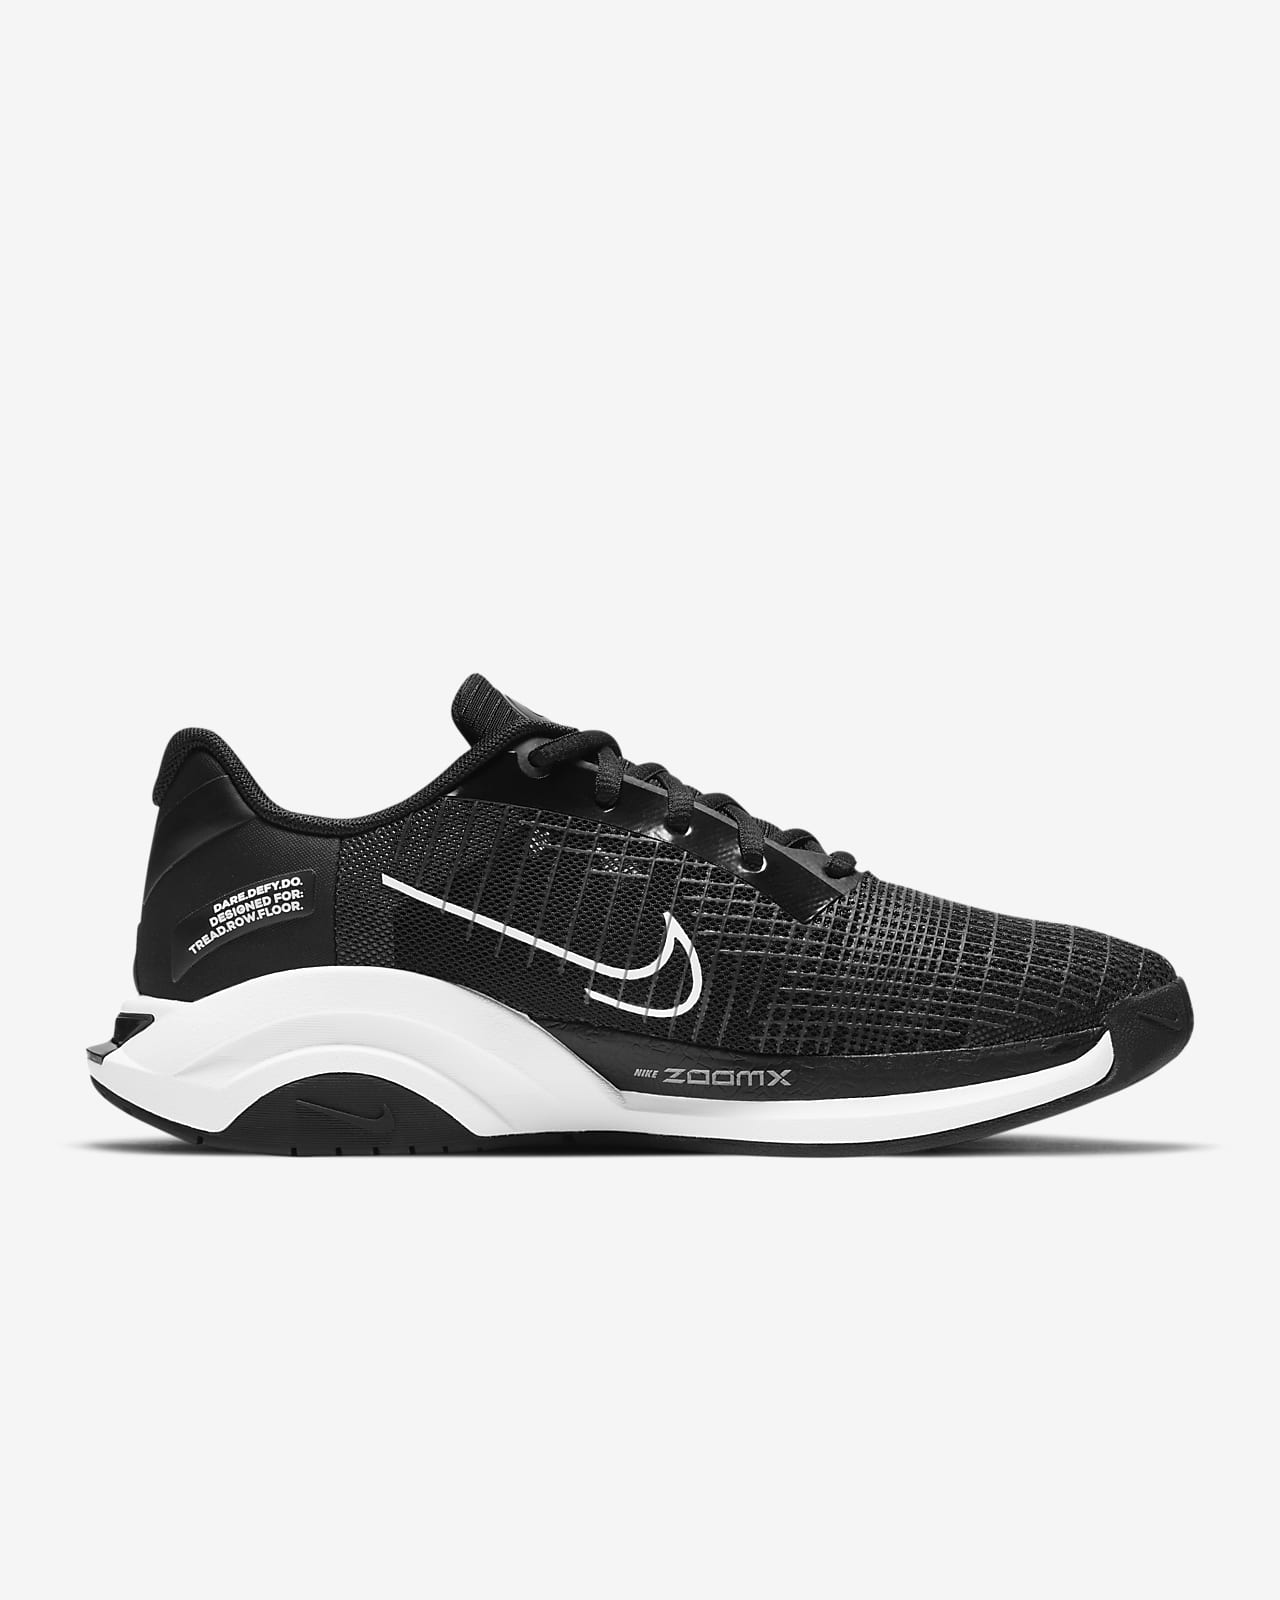 Nike ZoomX Shoes.